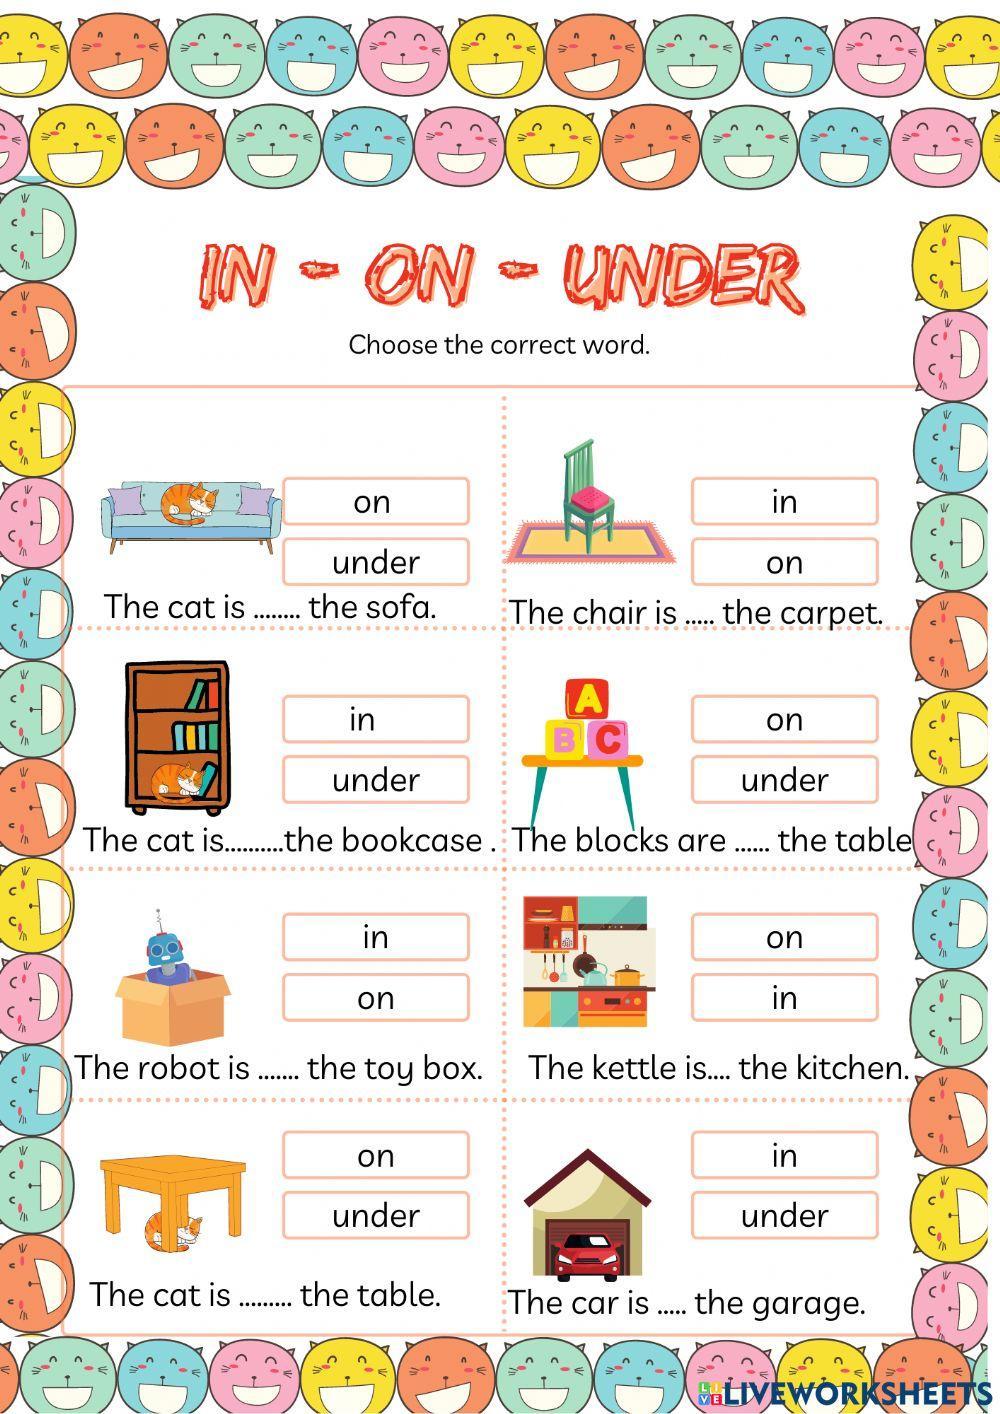 My house(Prepositions)